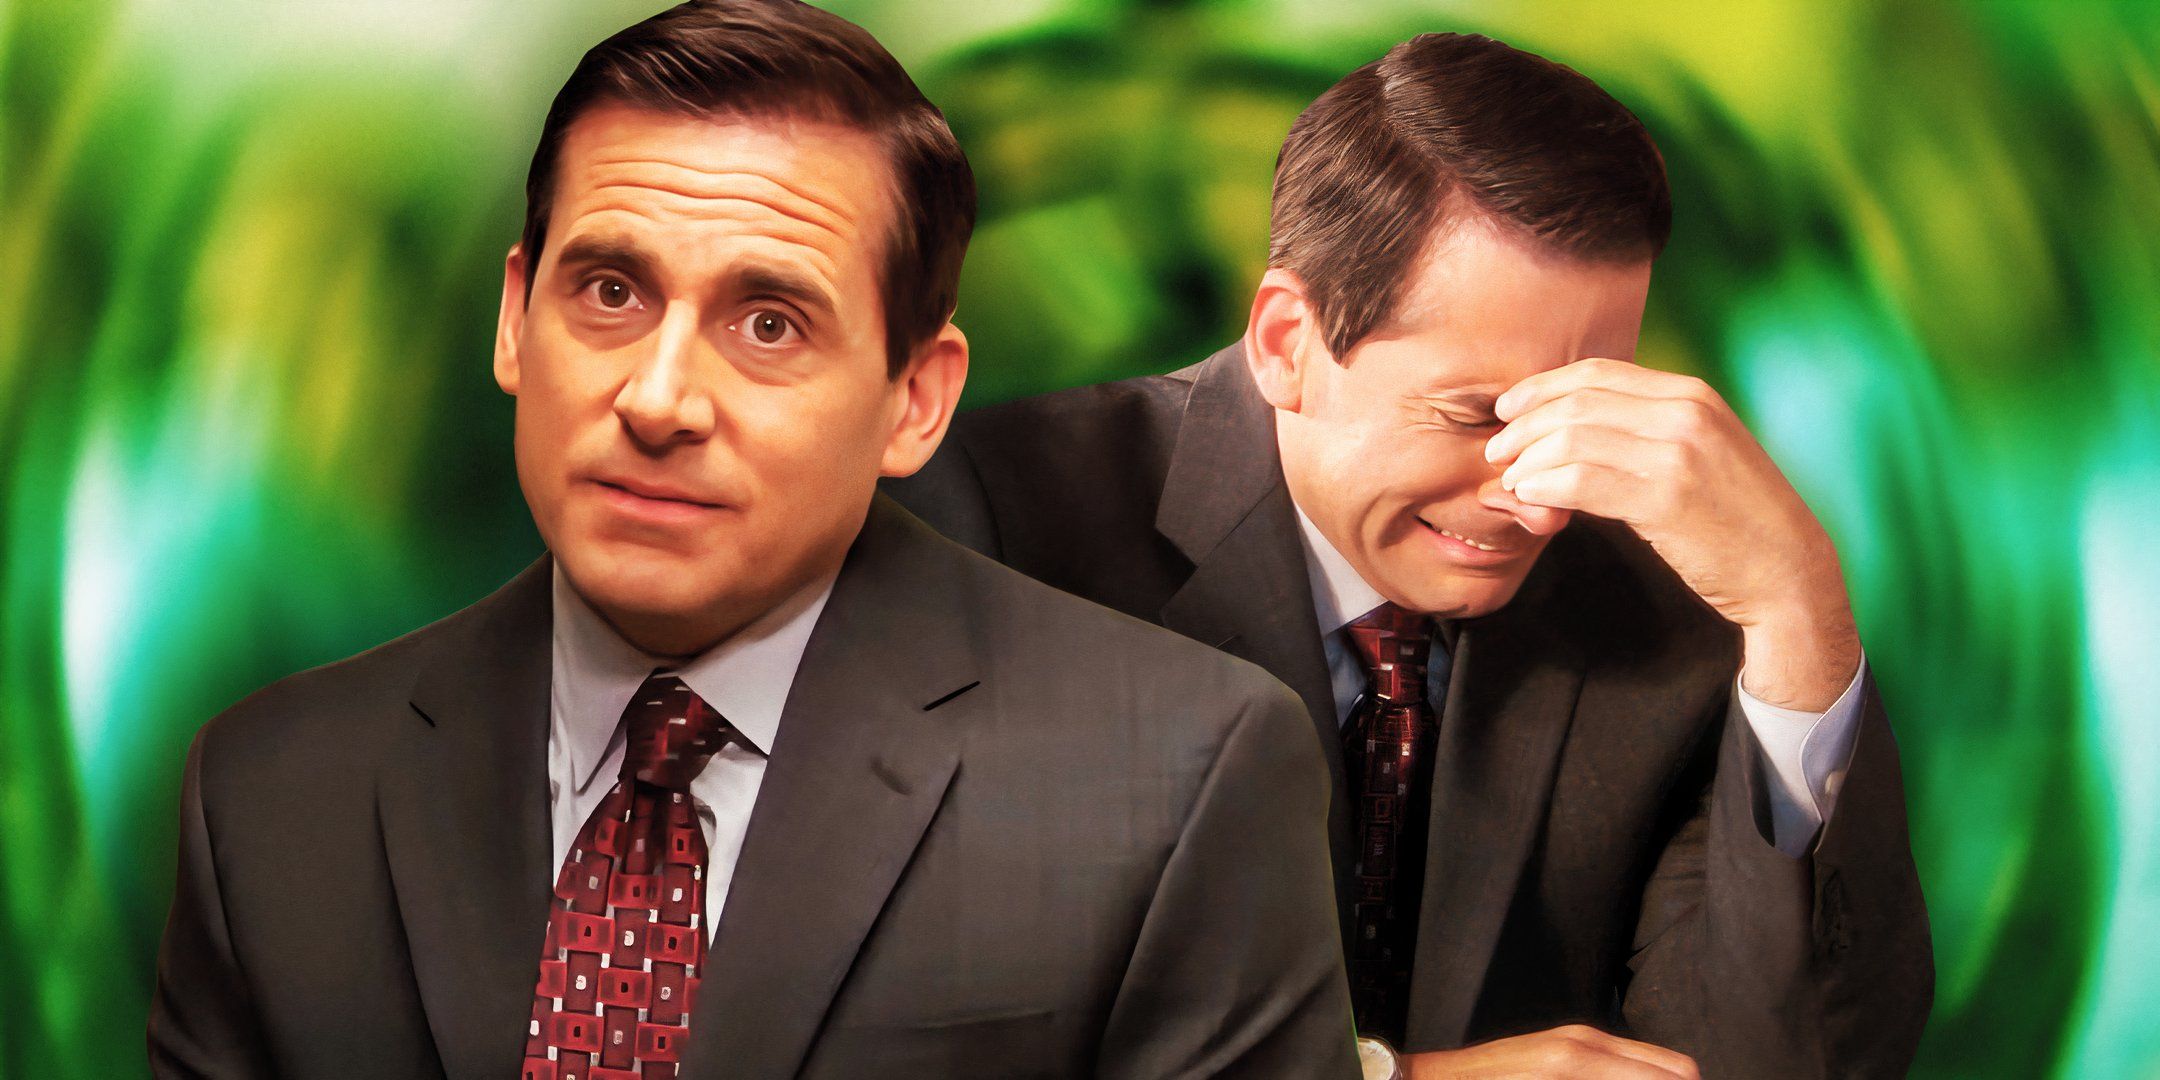 Steve Carell as Michael Scott from The Office